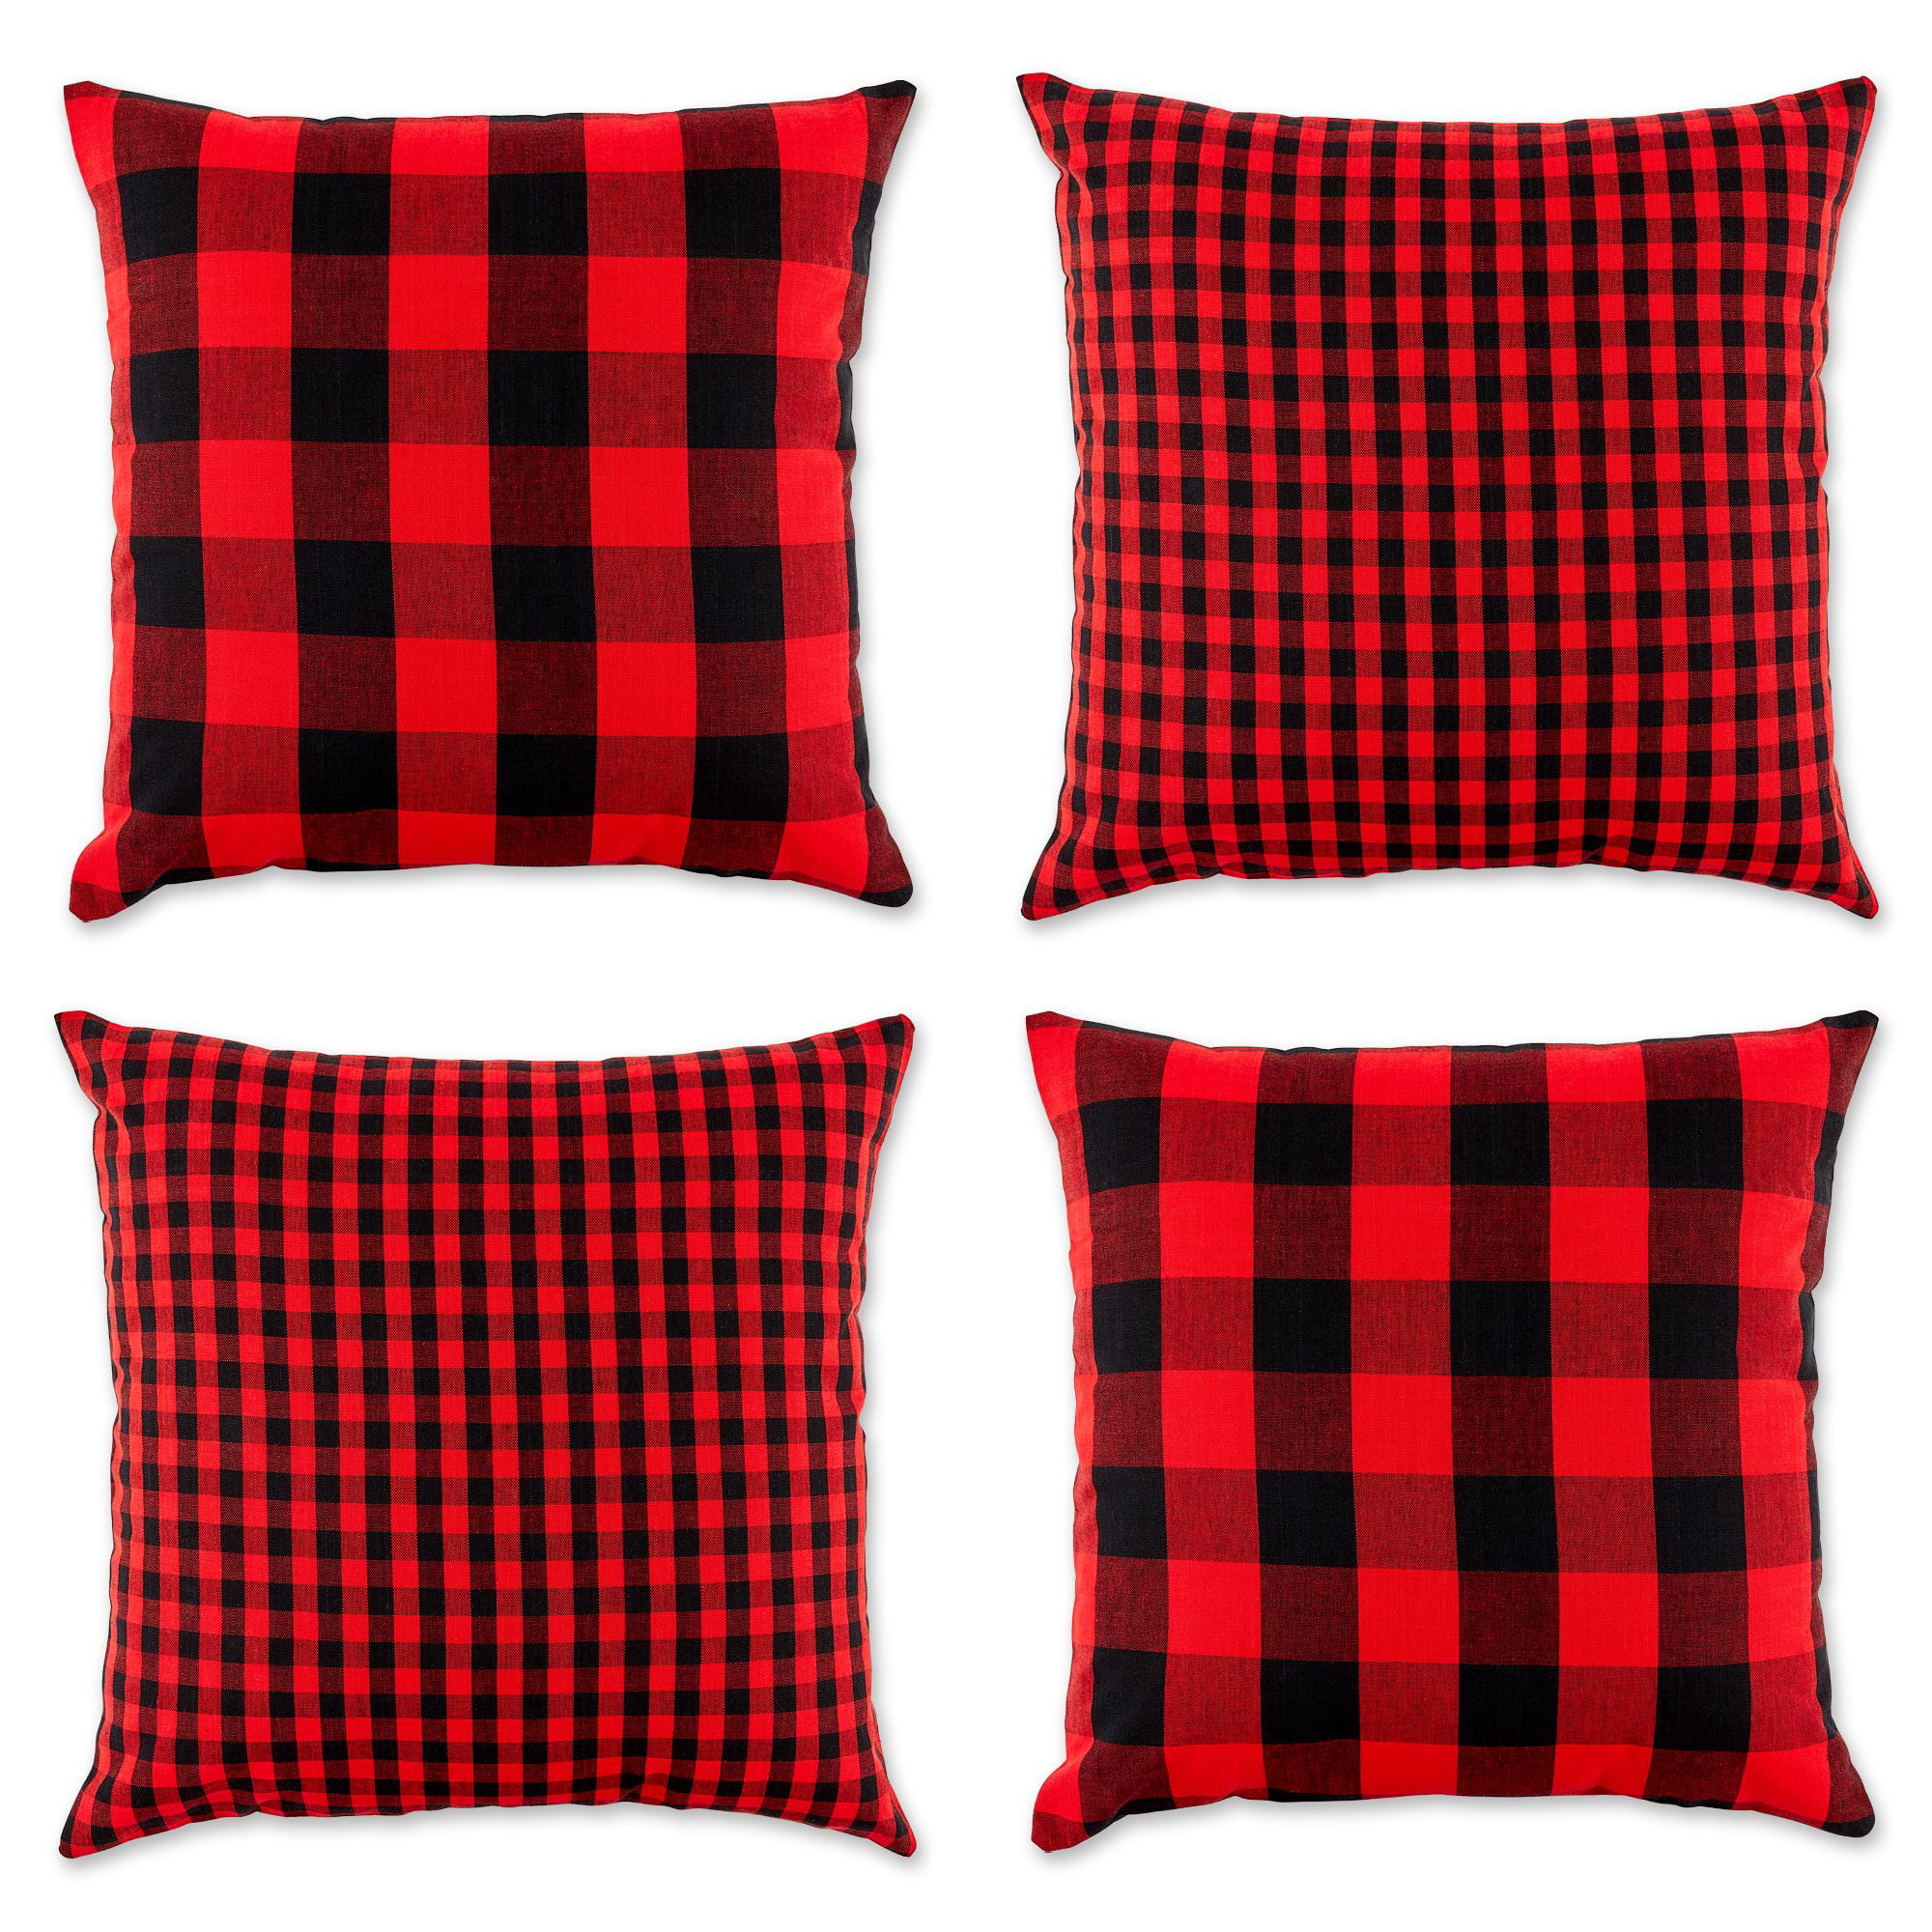 DII Gingham/Check Pillow Cover Assorted Black/White 12x20